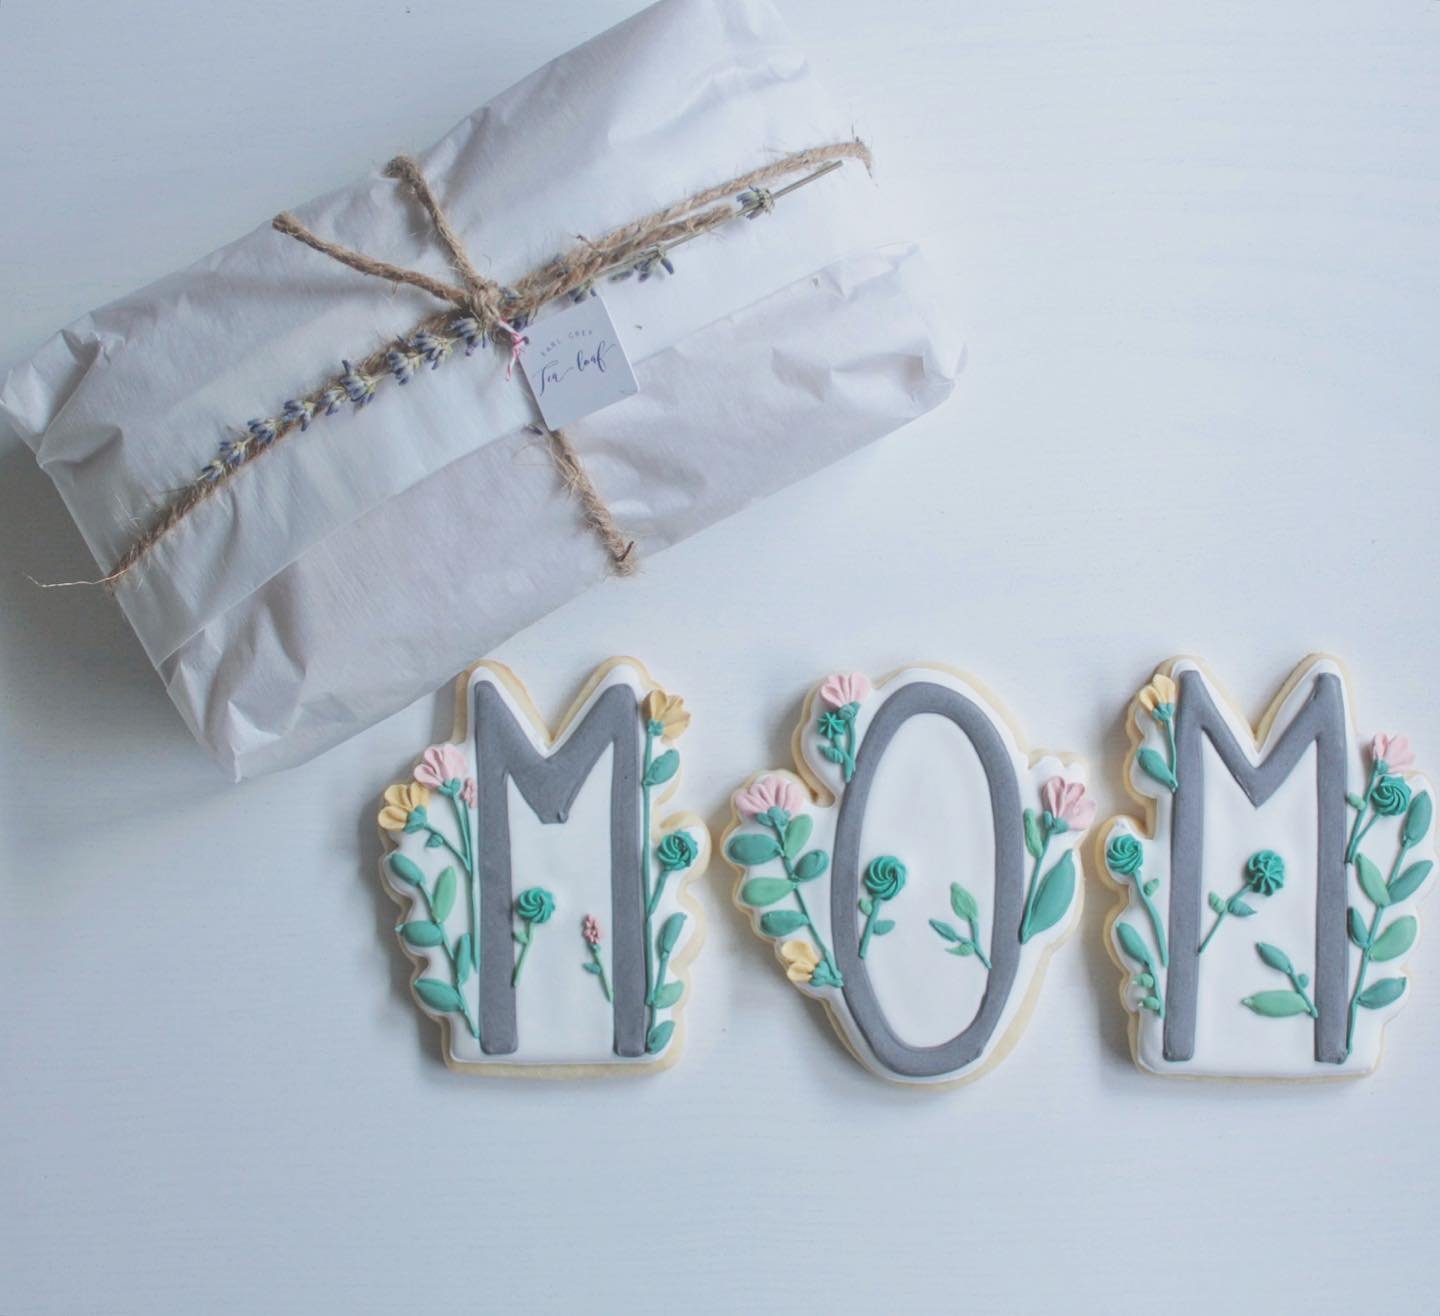 // MOM //
We will have a few more cookie gift boxes available today @moss_postpartum_house . Vanilla sugar cookies iced with a light vanilla royal icing, hand piped florals inspired by @themillerswifecustomcookies and cutters courtesy @thecookiery.ca